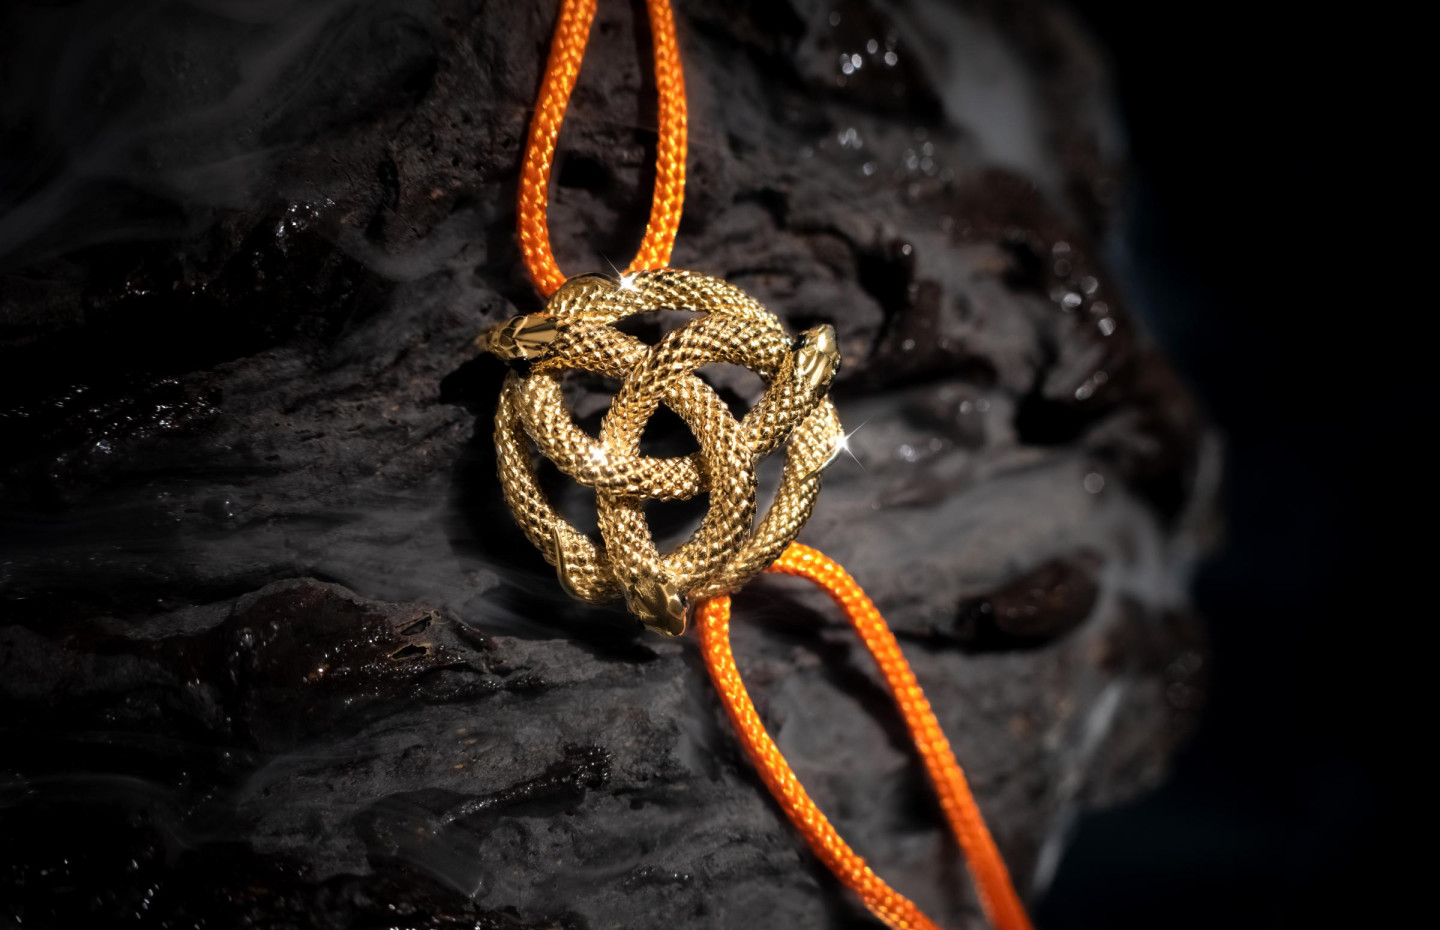 Godsforge and Karmalogic released the “Snakes” jewelry collection